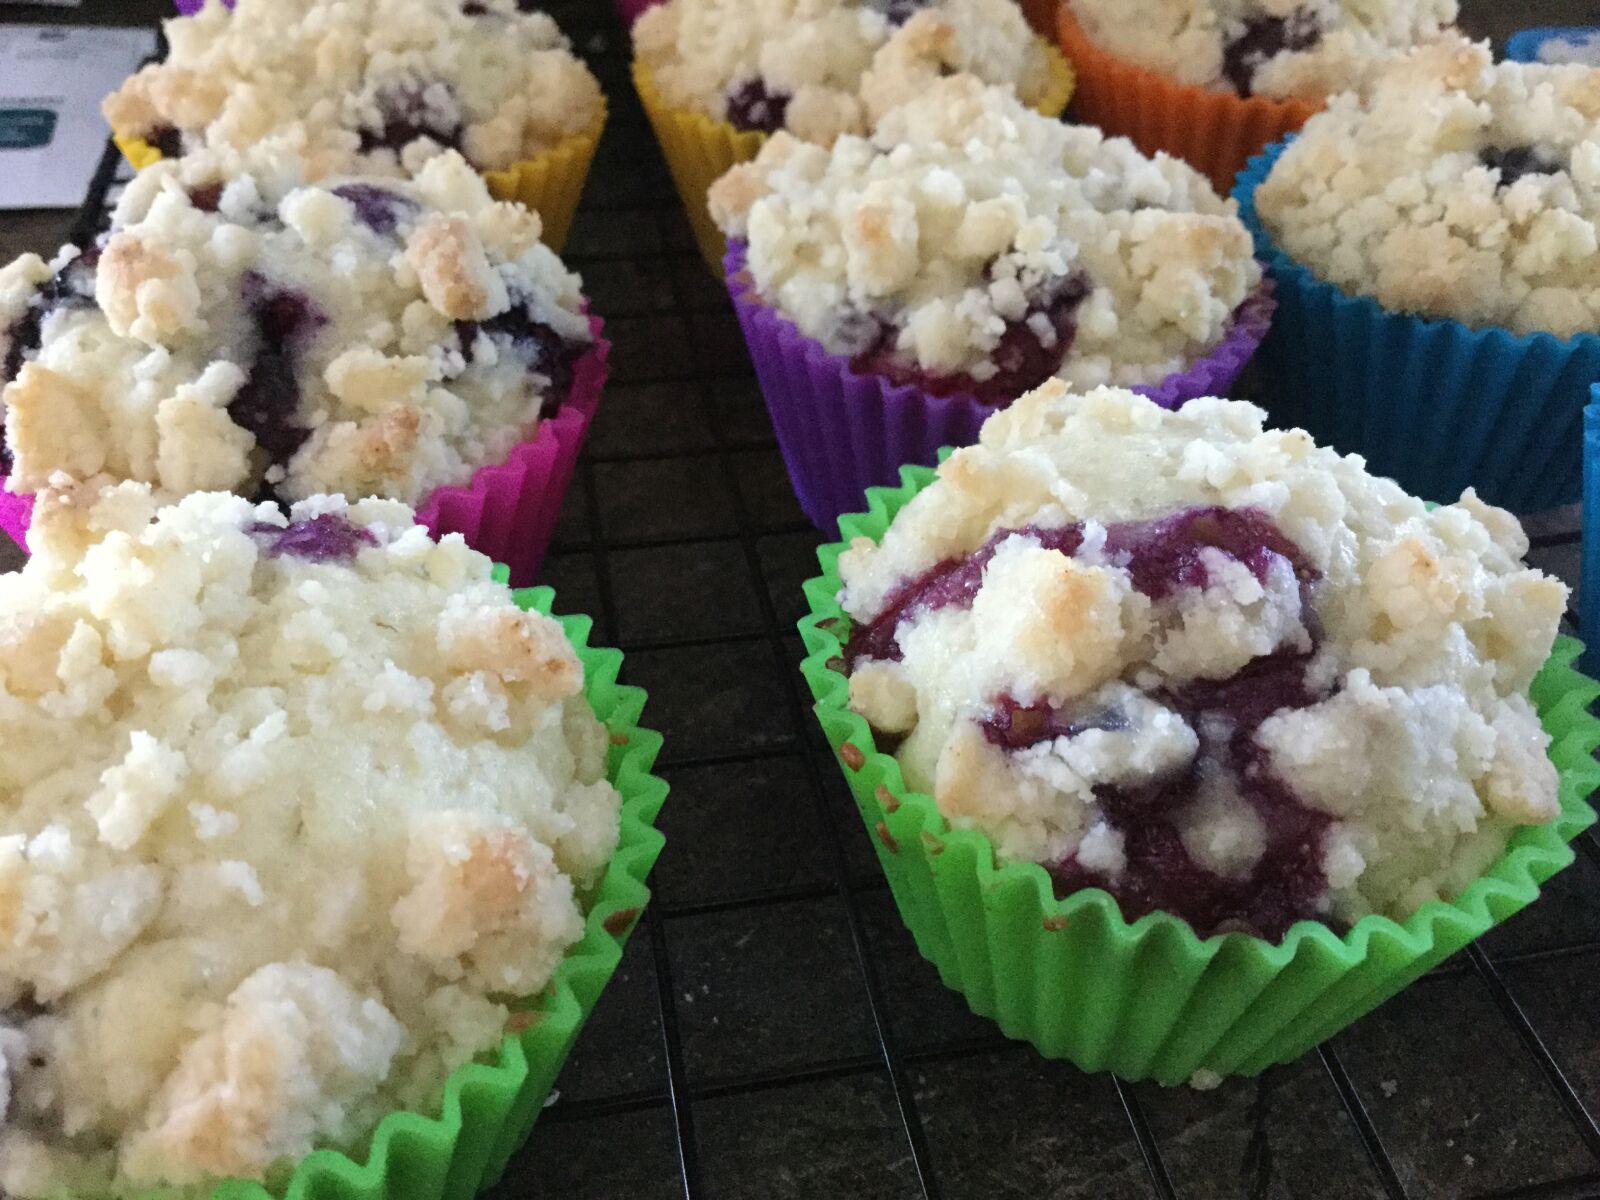 iPad Air 2 back camera 3.3mm f/2.4 sample photo. Blueberry, muffin, muffins photography